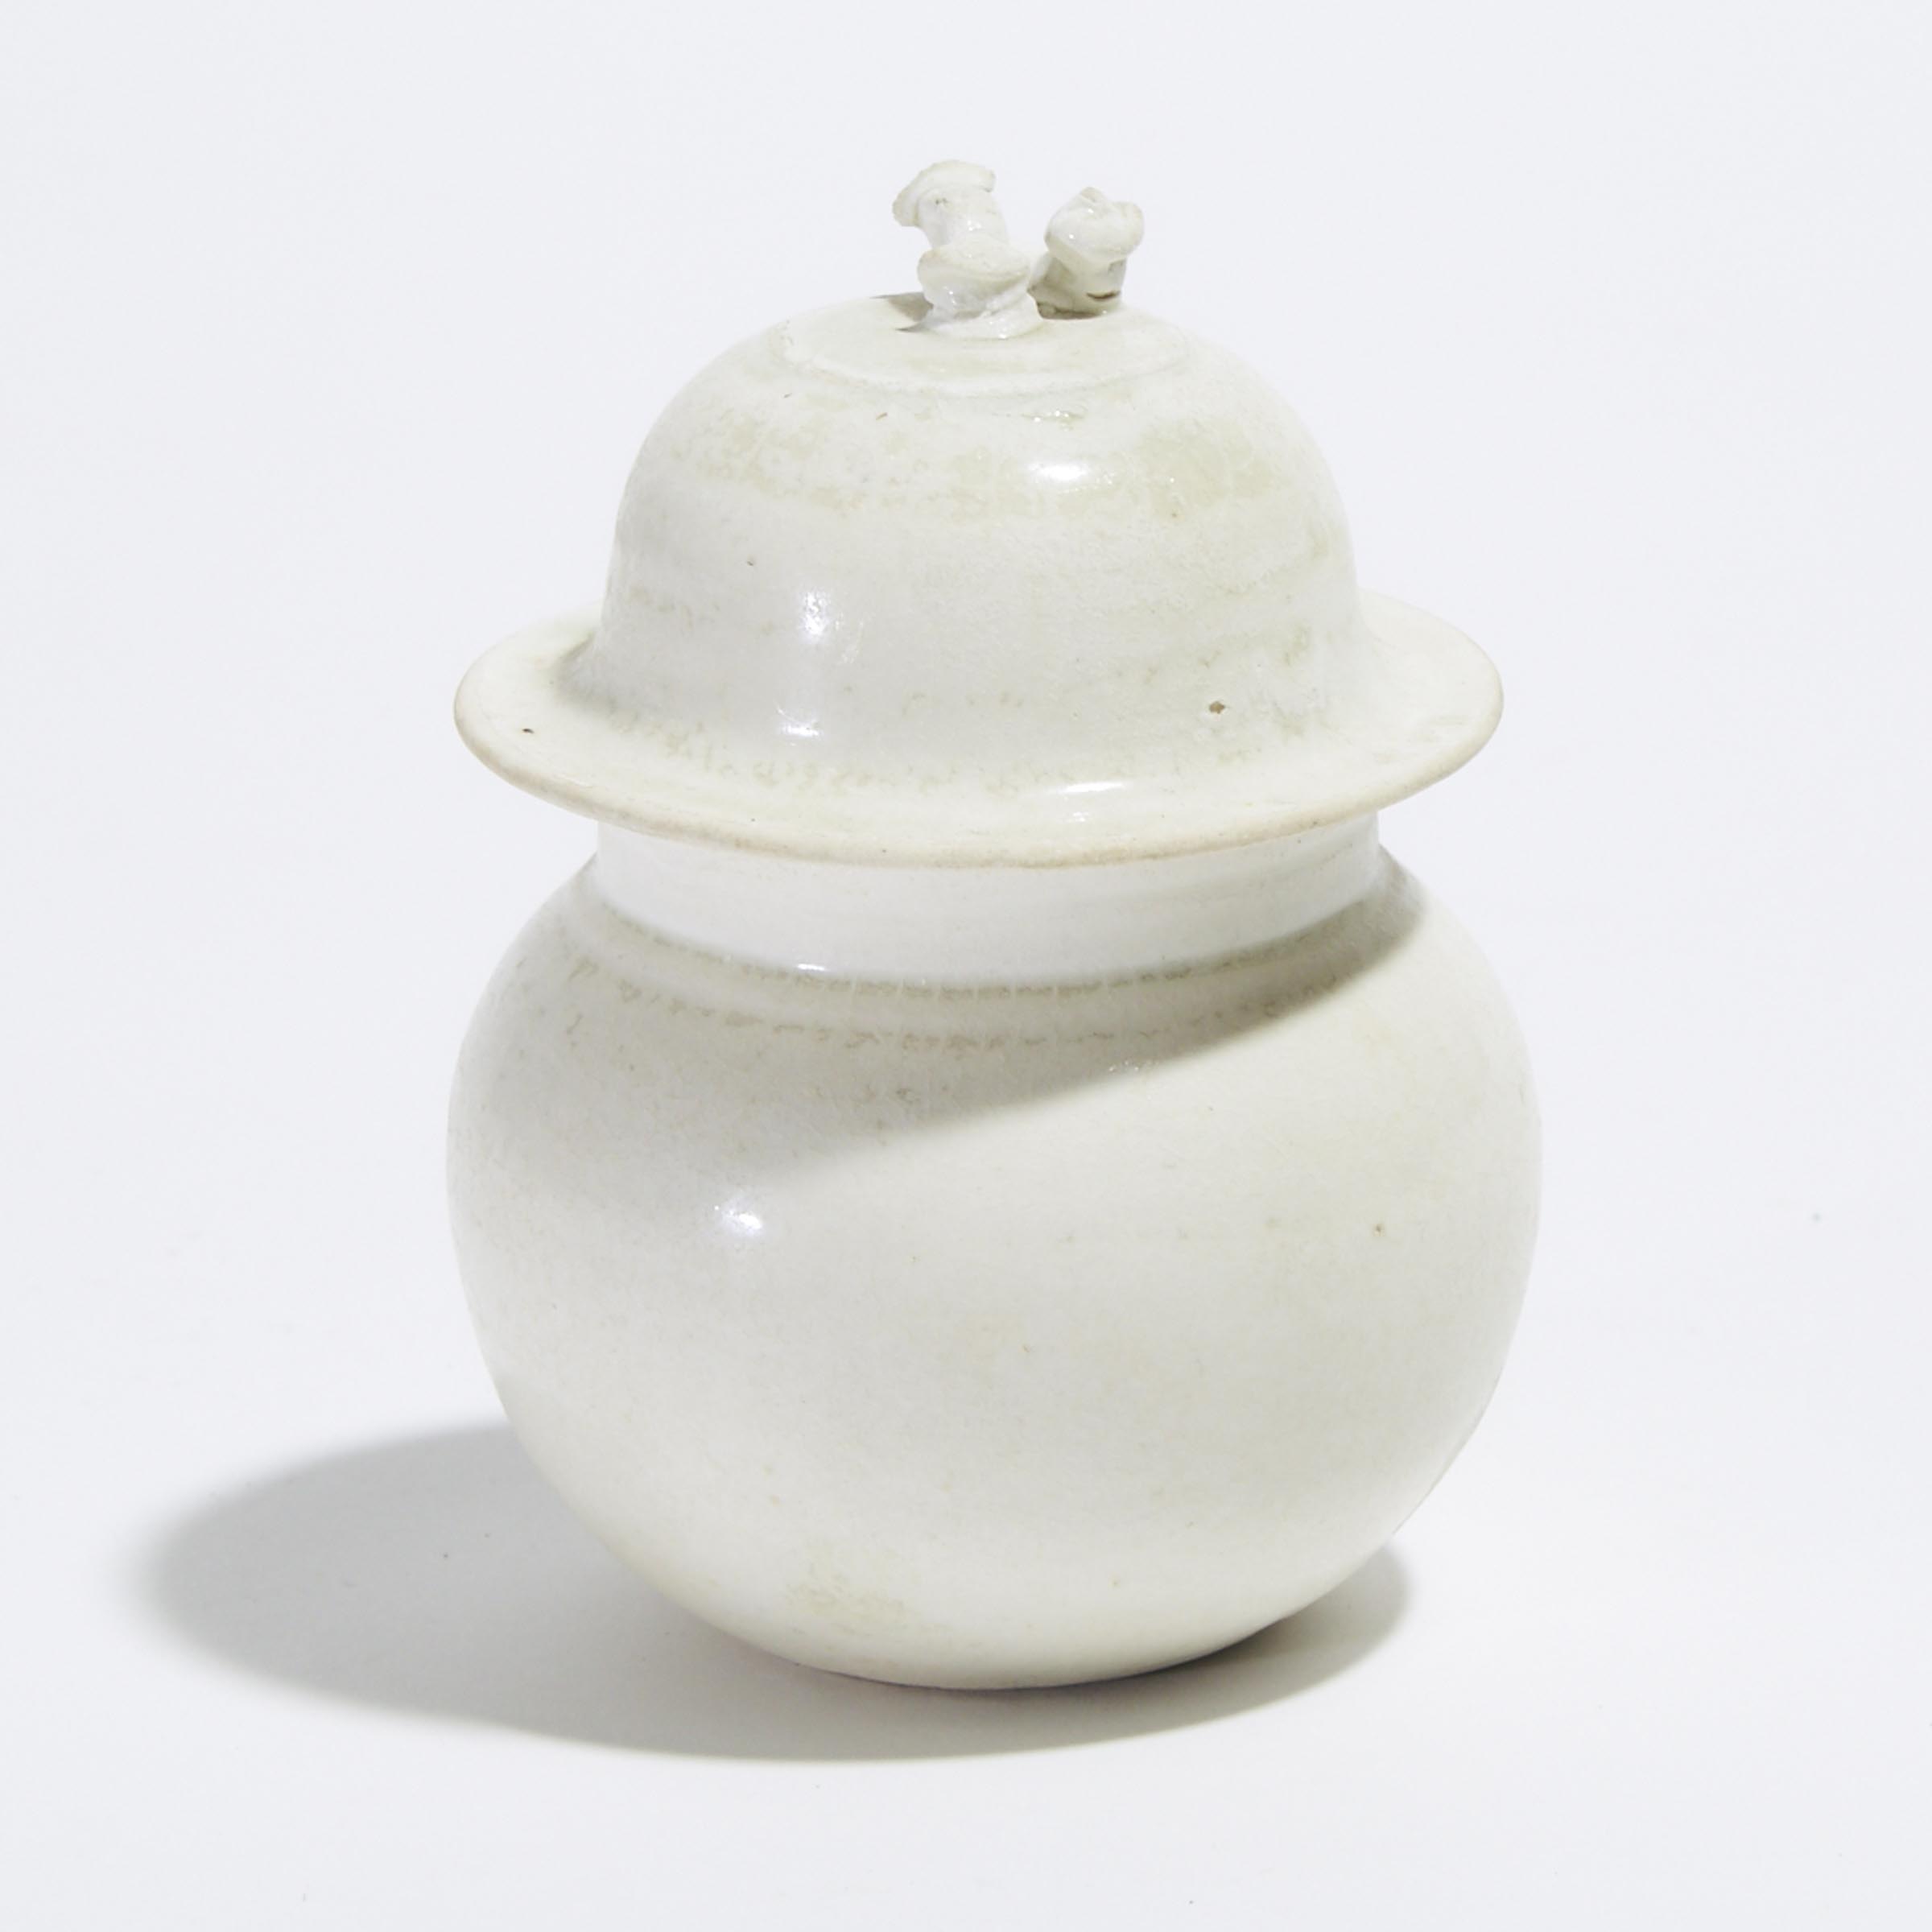 A Small White-Glazed Jar and Cover, Tang Dynasty (AD 618-907)